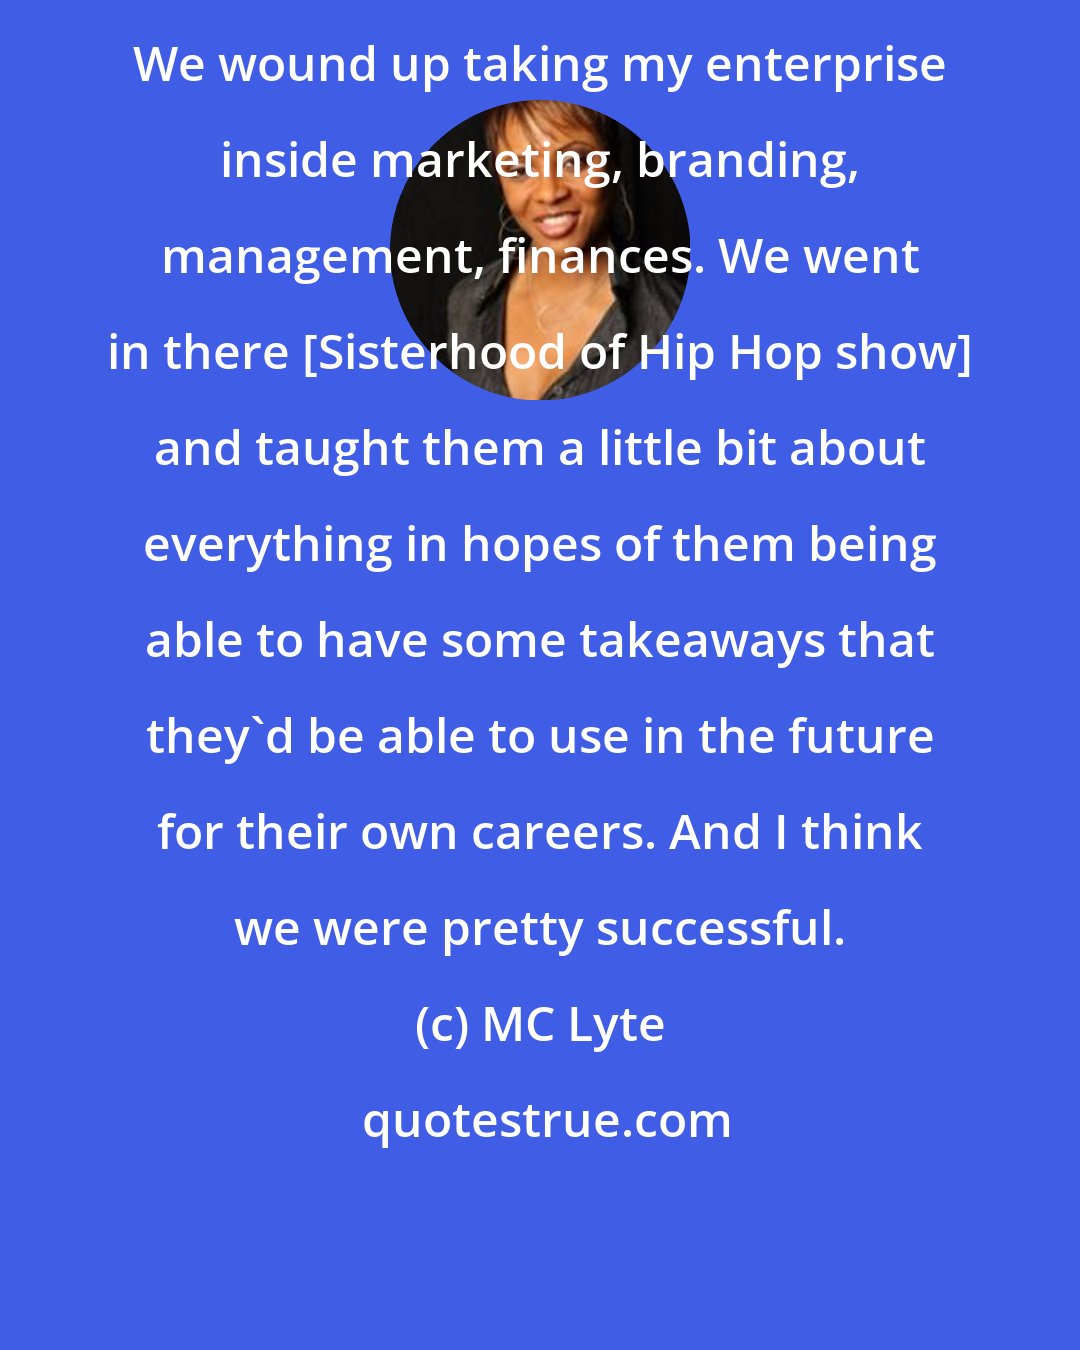 MC Lyte: We wound up taking my enterprise inside marketing, branding, management, finances. We went in there [Sisterhood of Hip Hop show] and taught them a little bit about everything in hopes of them being able to have some takeaways that they'd be able to use in the future for their own careers. And I think we were pretty successful.